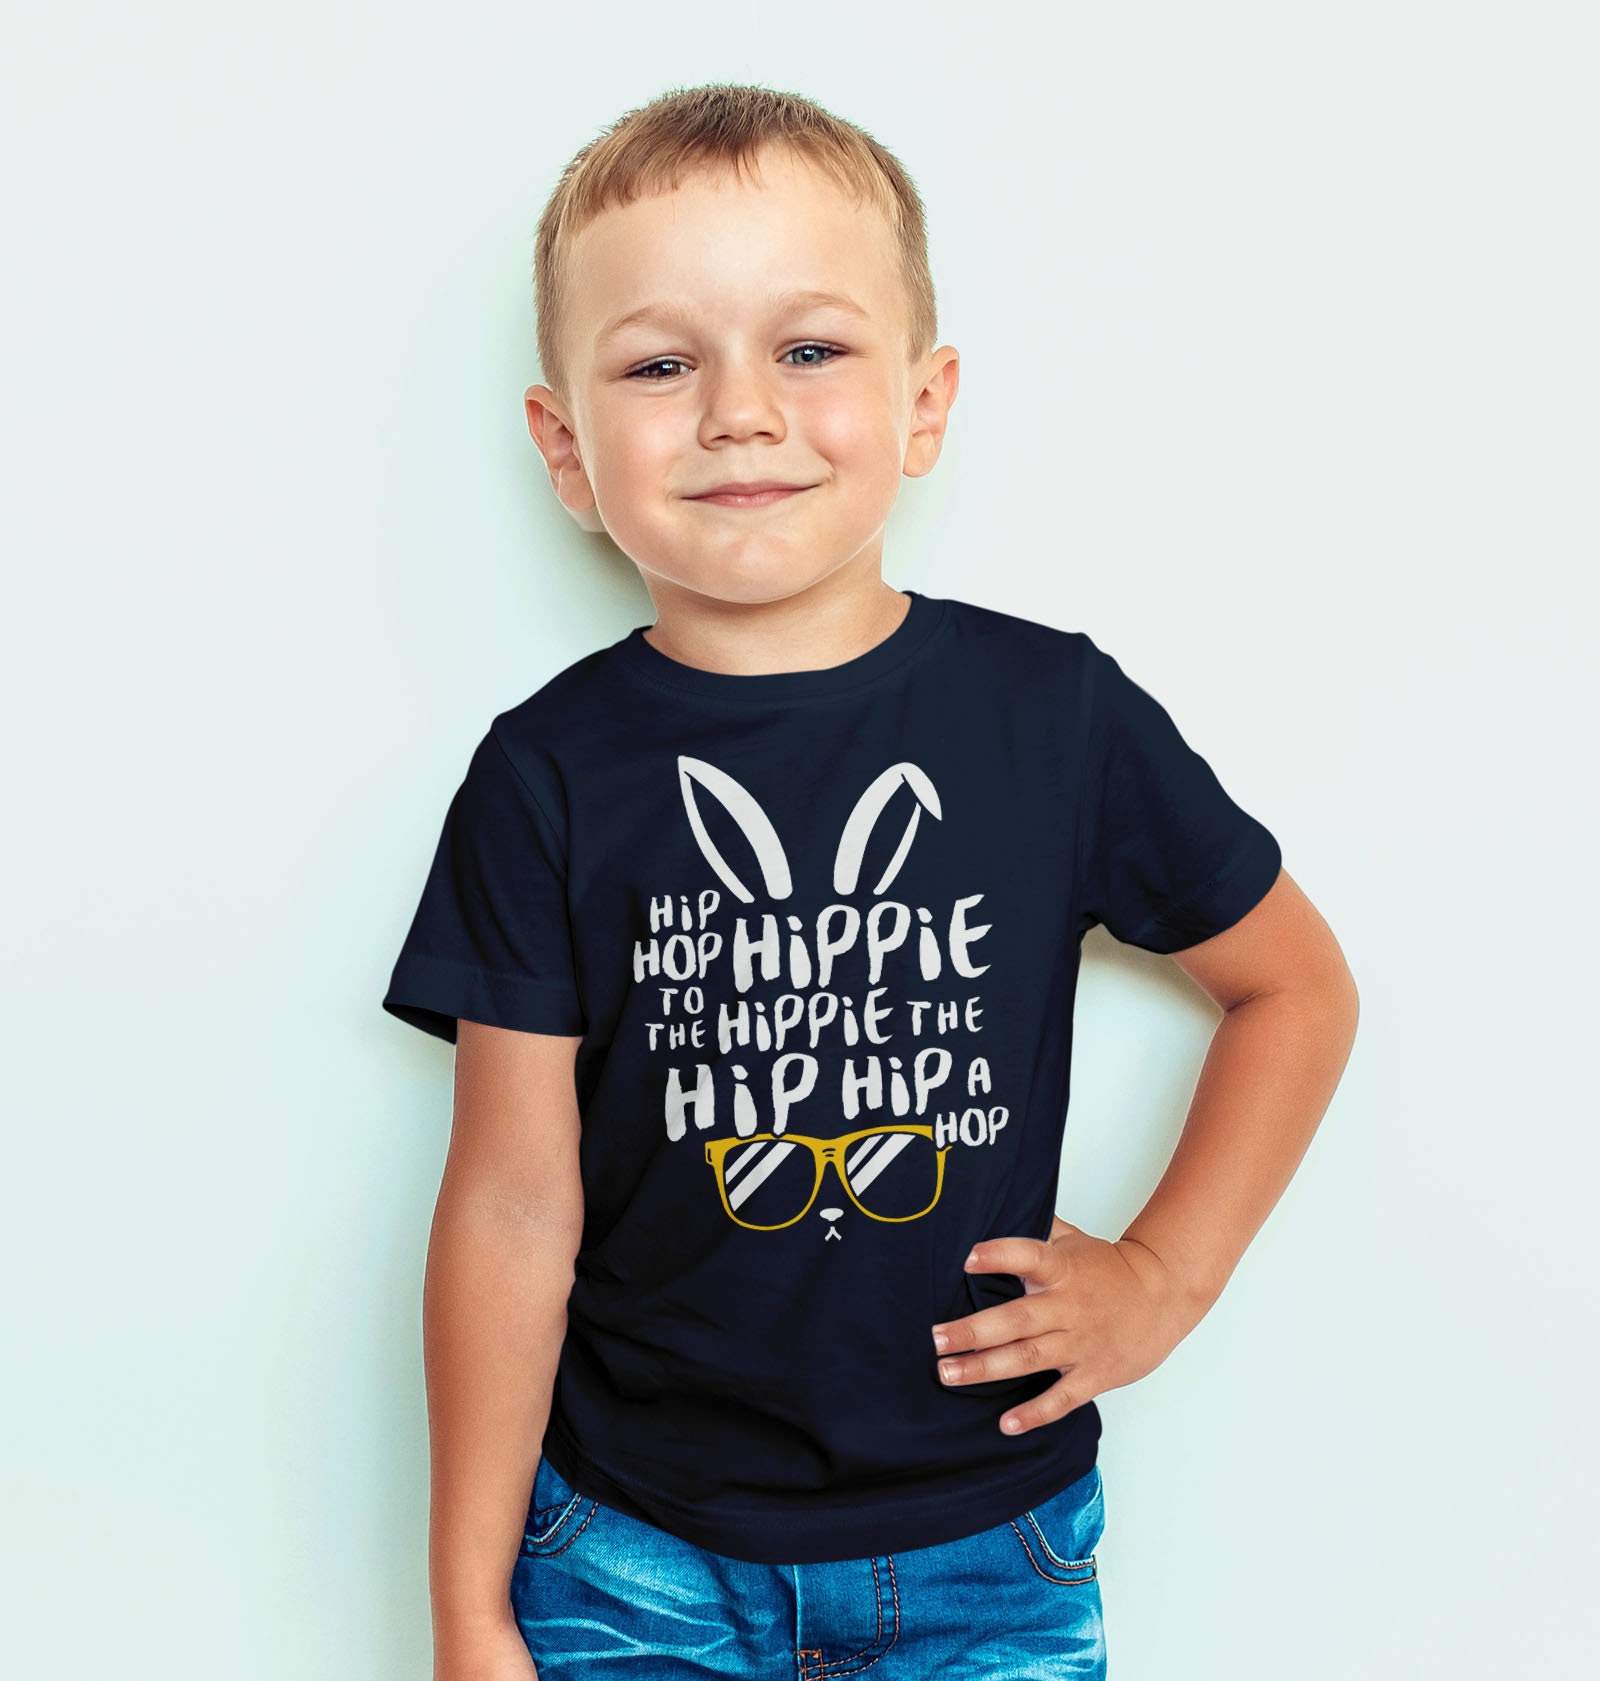 Youth Jesus and Jelly Beans Easter Shirt-Youth Easter Tops-Cute Easter Shirts-Cute Tops and Tees-Graphic Tees Easter egg Hunting